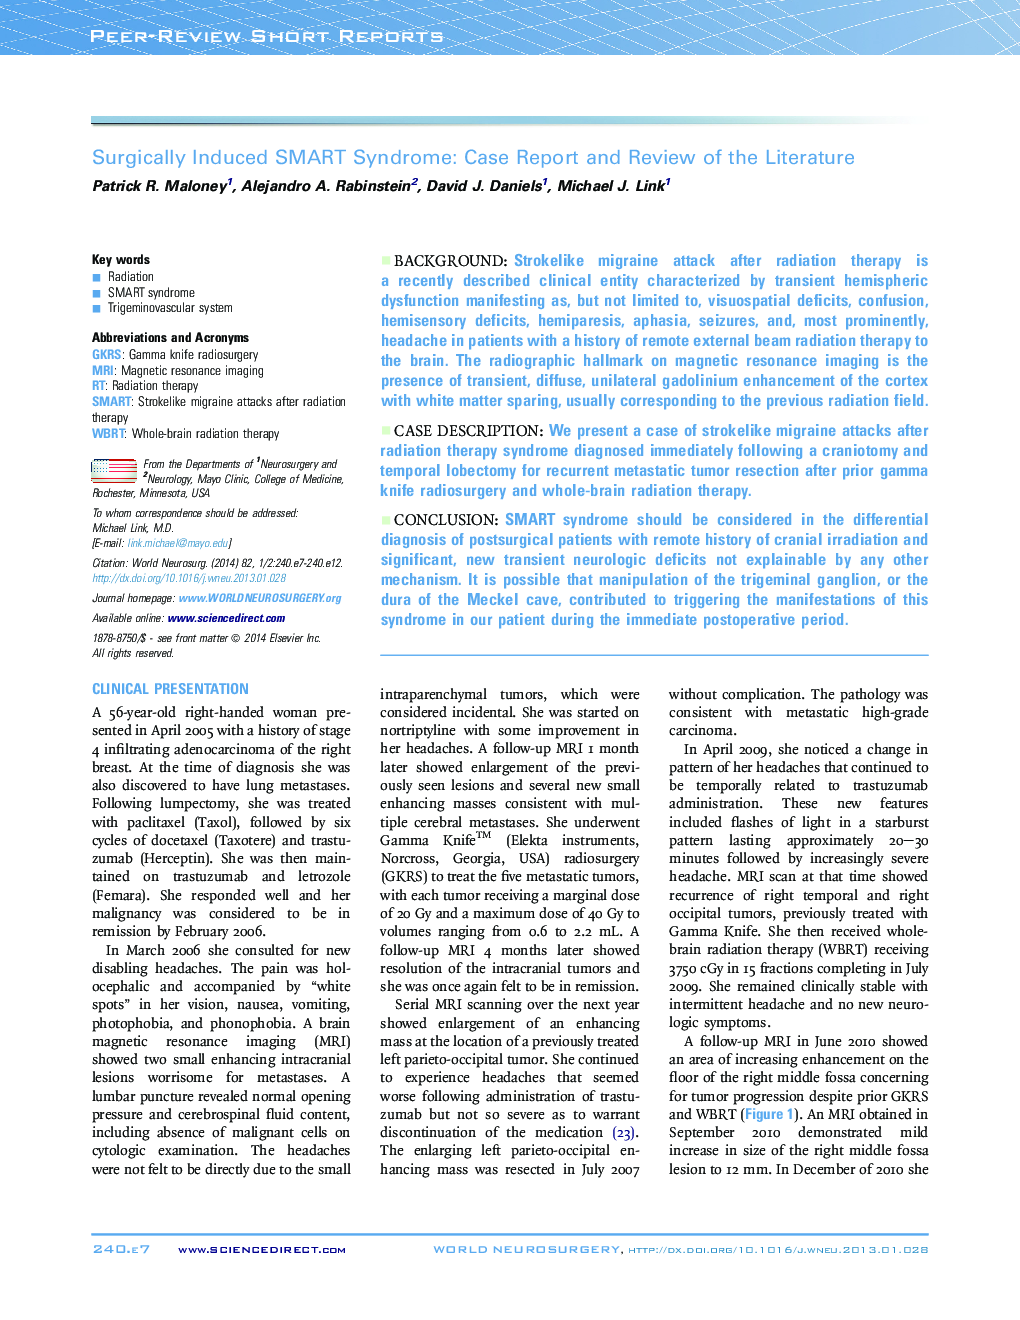 Surgically Induced SMART Syndrome: Case Report and Review of the Literature